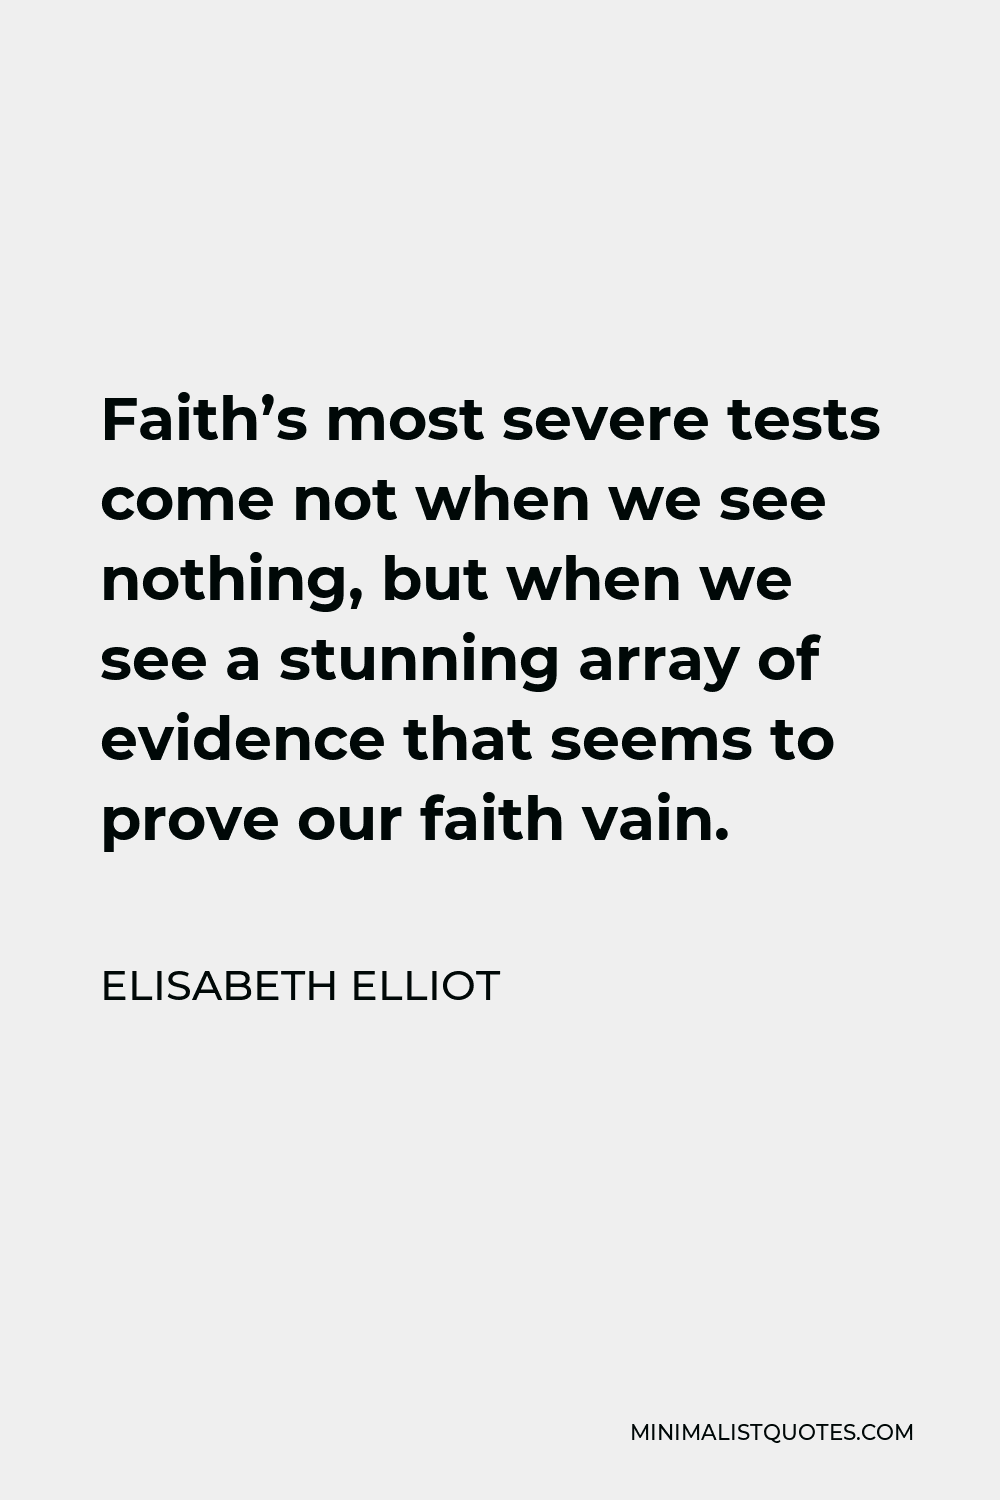 Elisabeth Elliot Quote - Faith’s most severe tests come not when we see nothing, but when we see a stunning array of evidence that seems to prove our faith vain.